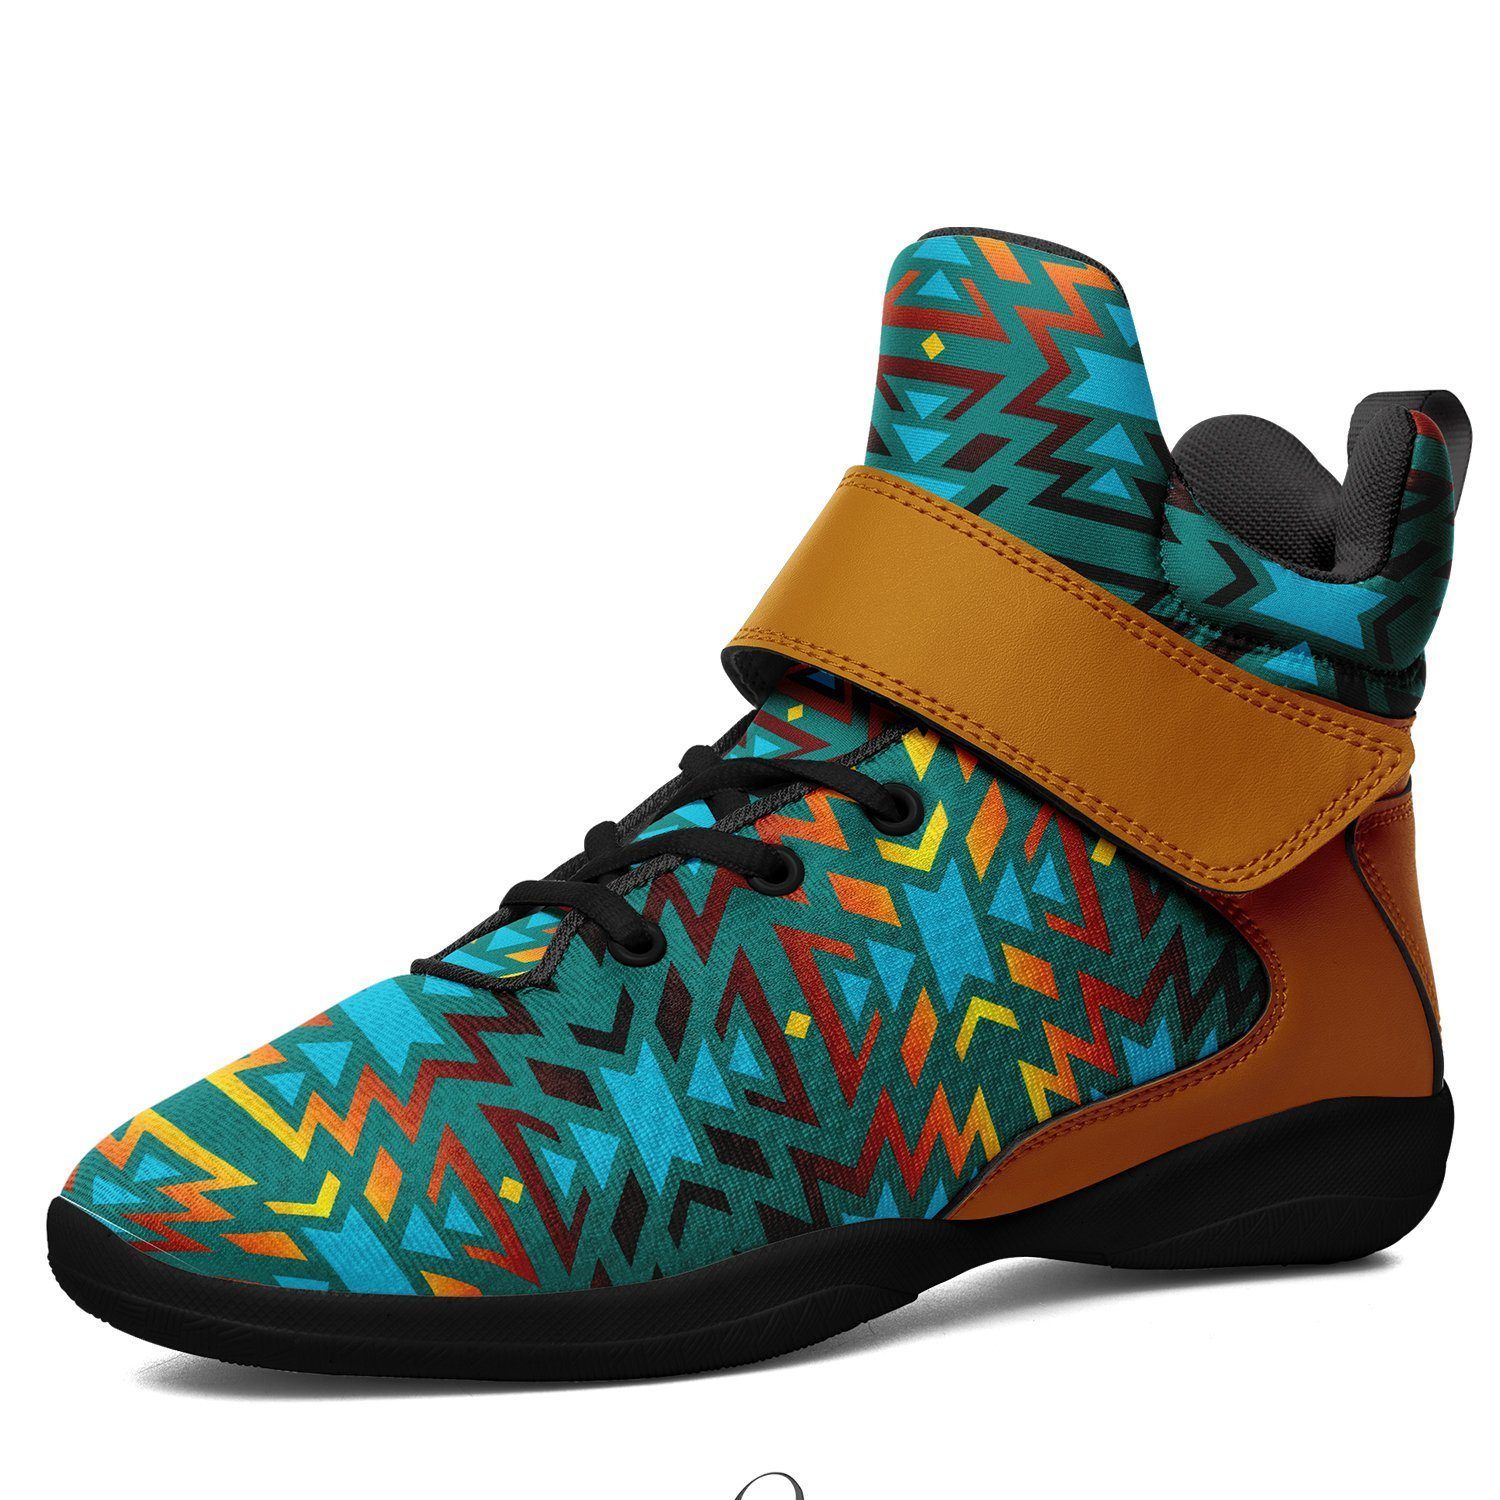 Fire Colors and Turquoise Teal Kid's Ipottaa Basketball / Sport High Top Shoes 49 Dzine US Child 12.5 / EUR 30 Black Sole with Brown Strap 